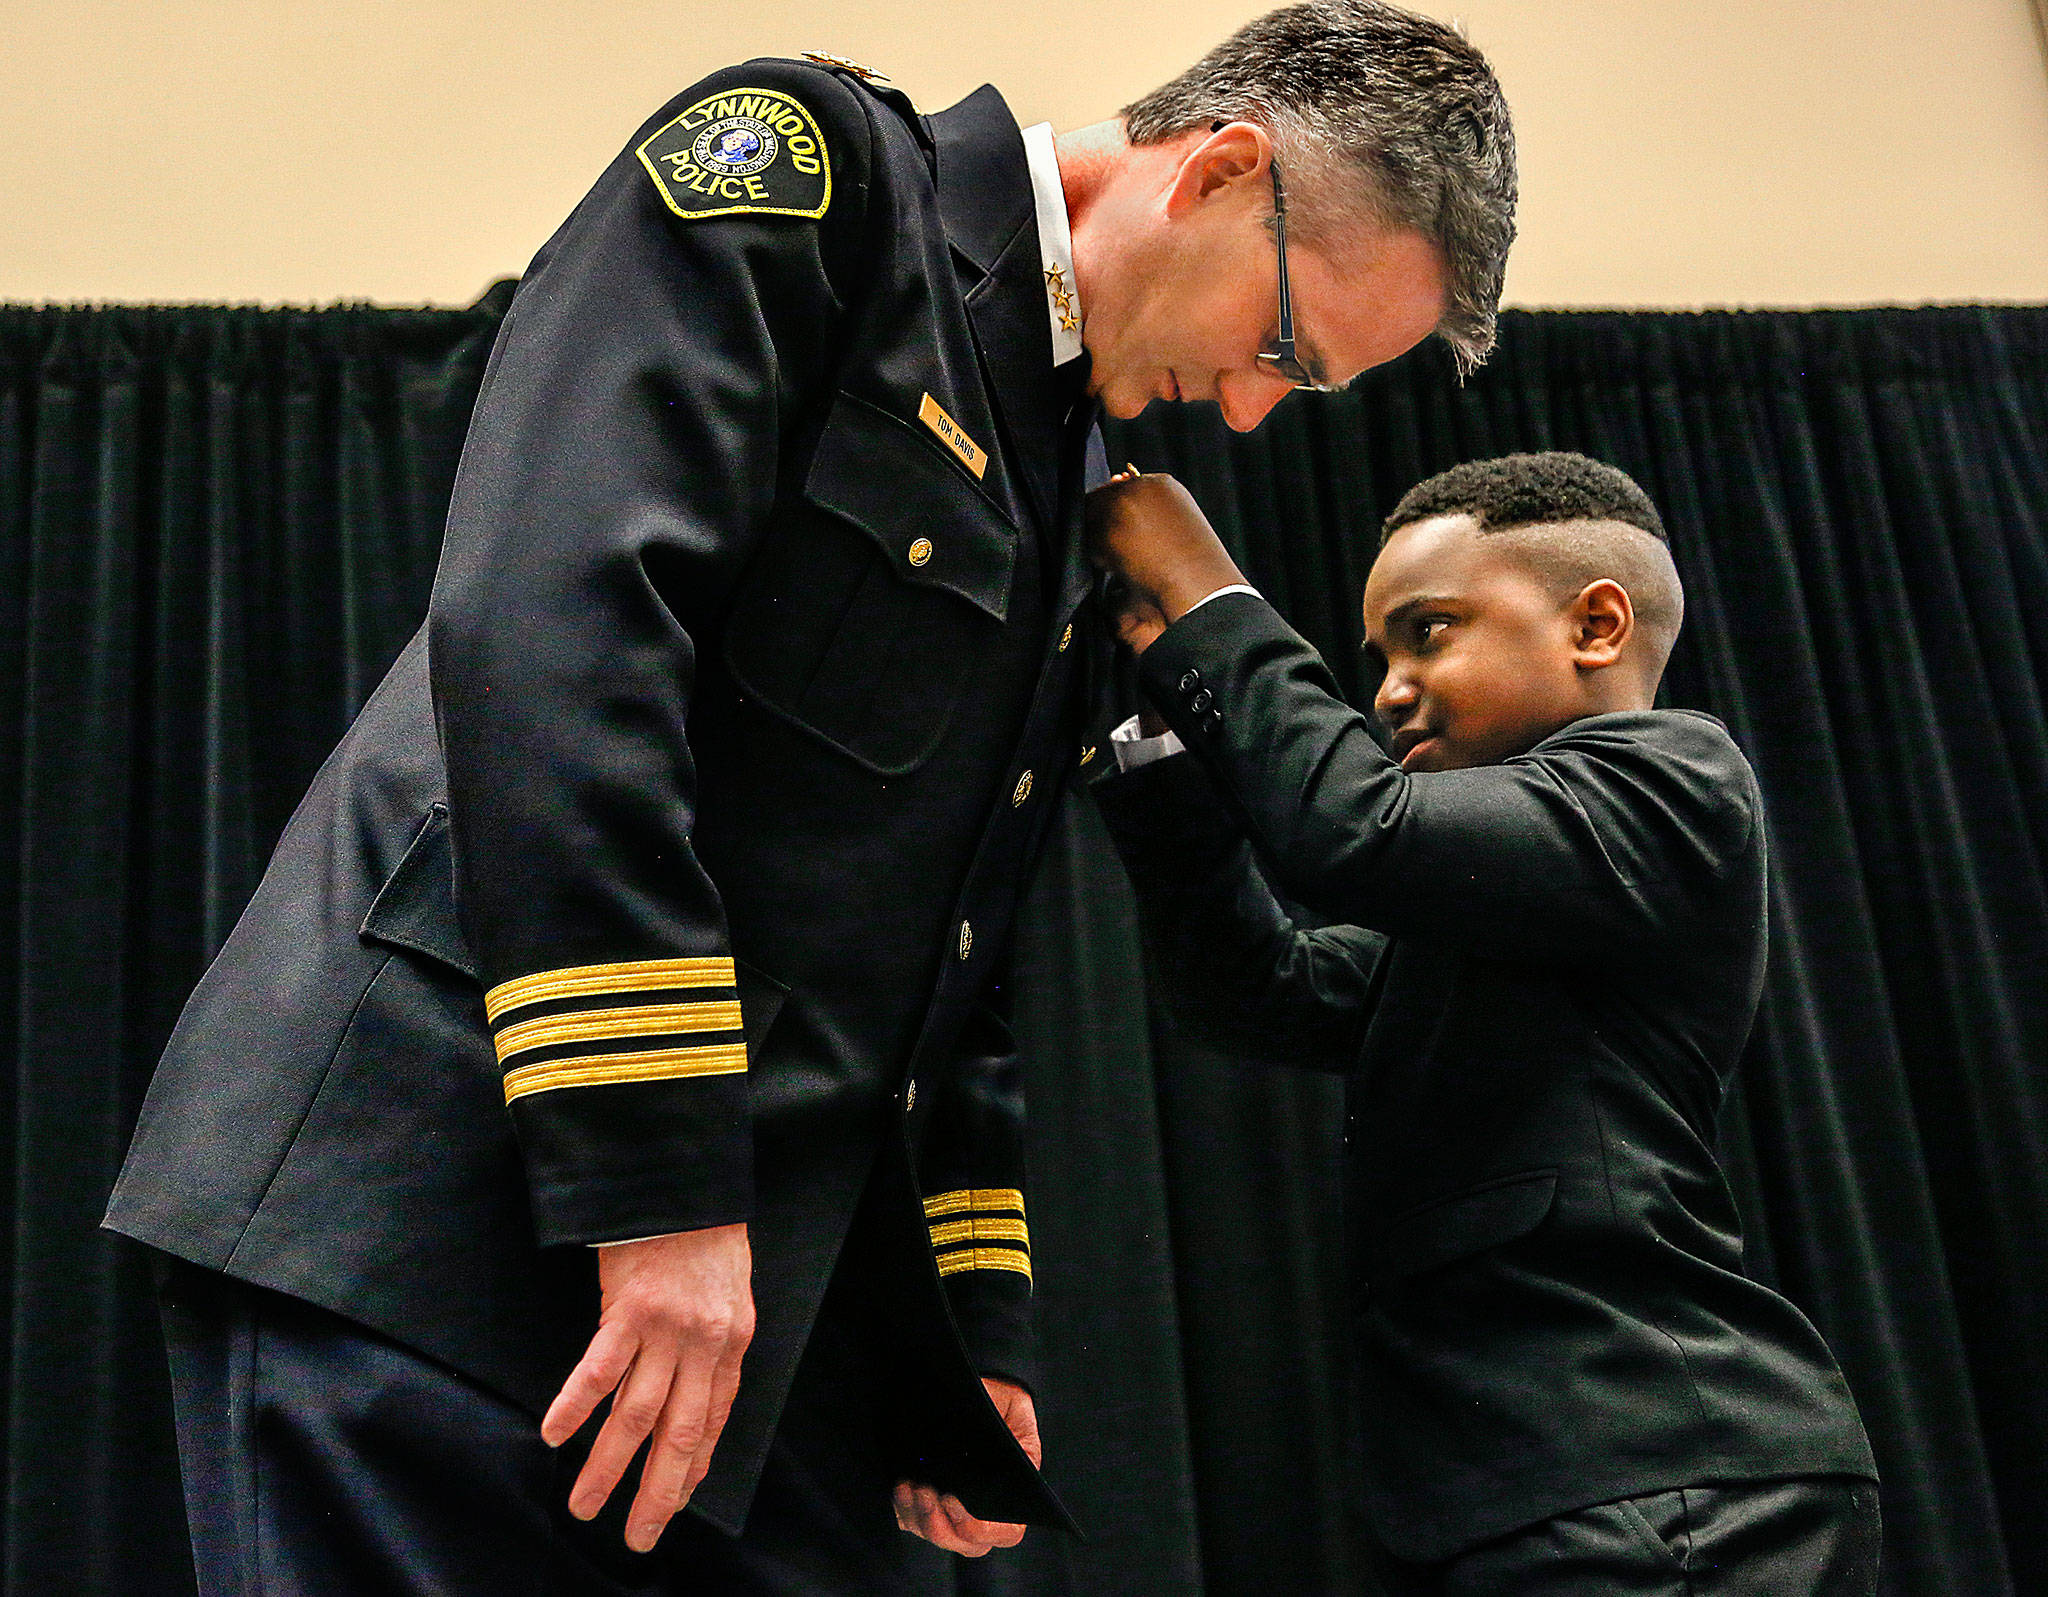 Tyson Webster, 9, of Shoreline, has the honor of pinning the badge on Lynnwood’s new chief of police, Tom Davis, on Tuesday during a celebration at the Lynnwood Convention Center. (Dan Bates / The Herald)